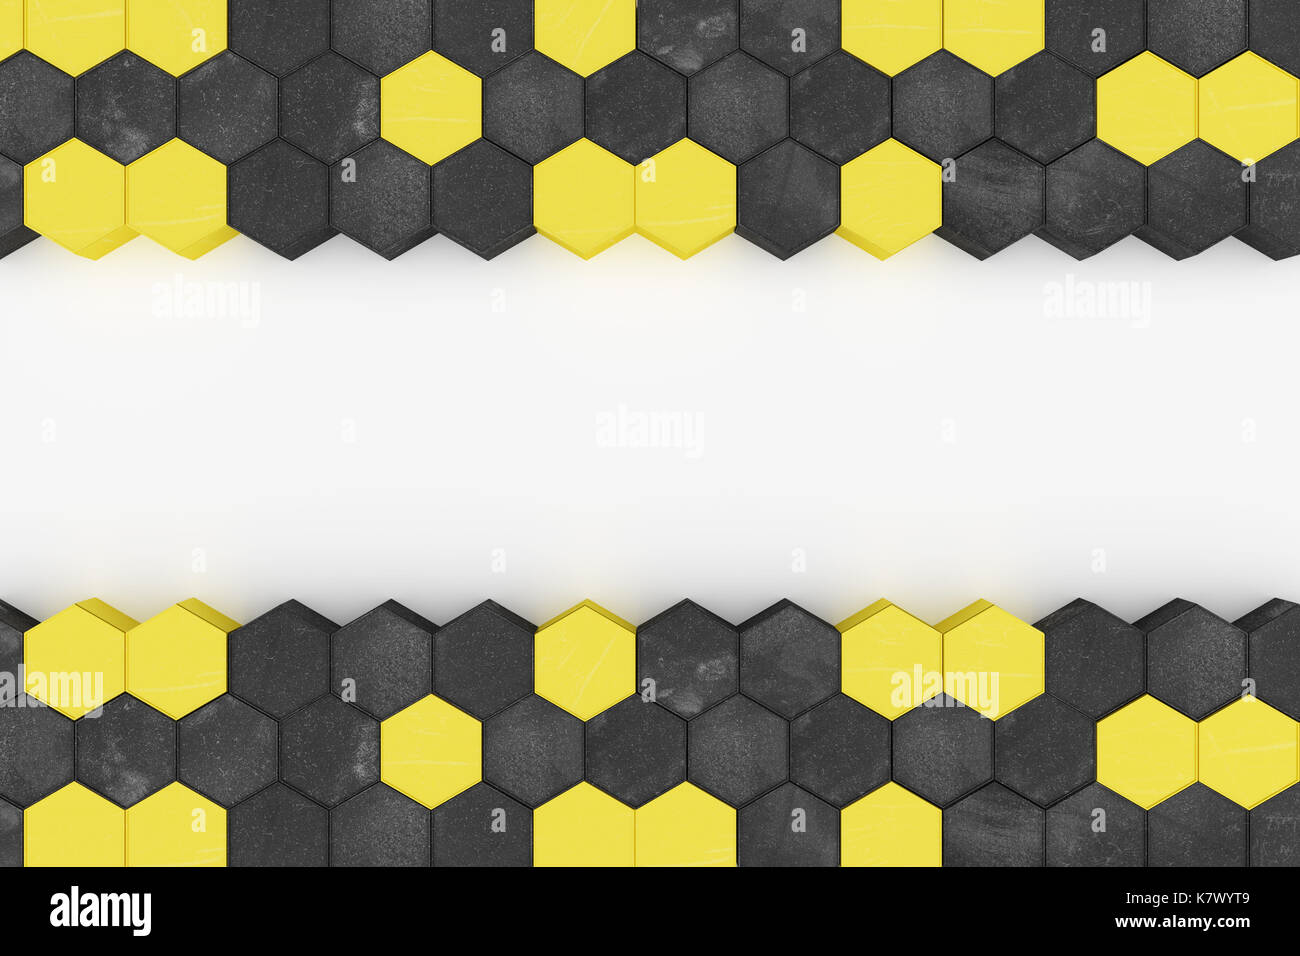 3d rendering of warning hazard hexagon pattern in yellow and black color Stock Photo